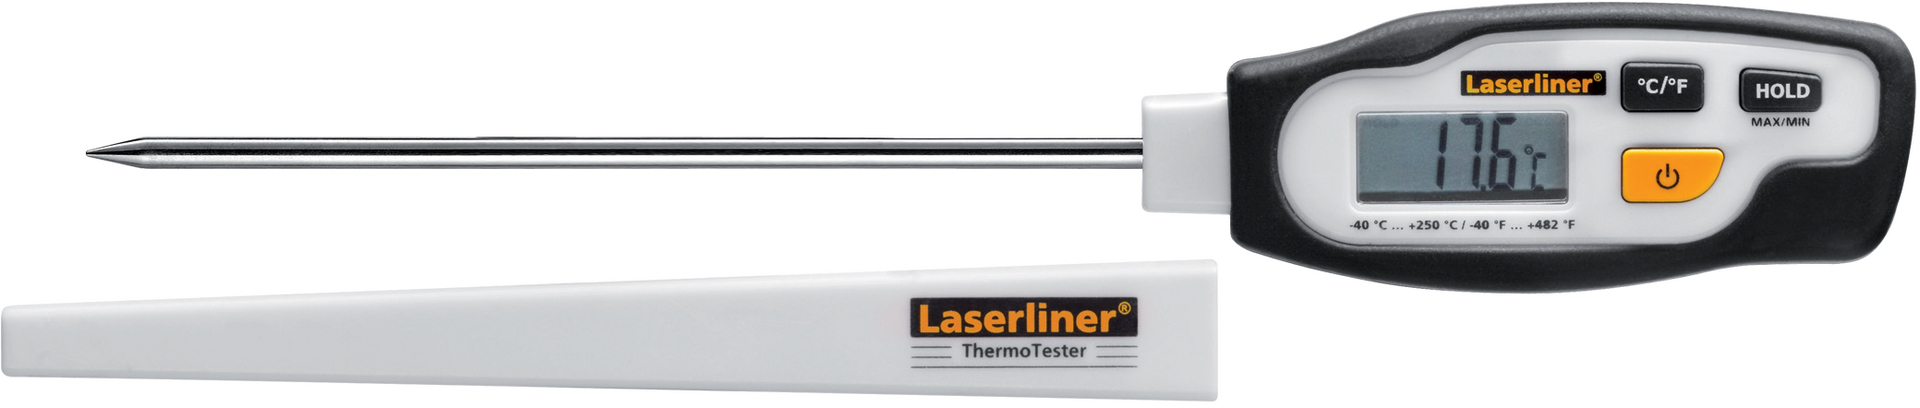 LASERLINER Digitales Thermometer ThermoTester, -40°C - 250°C mit Batterie